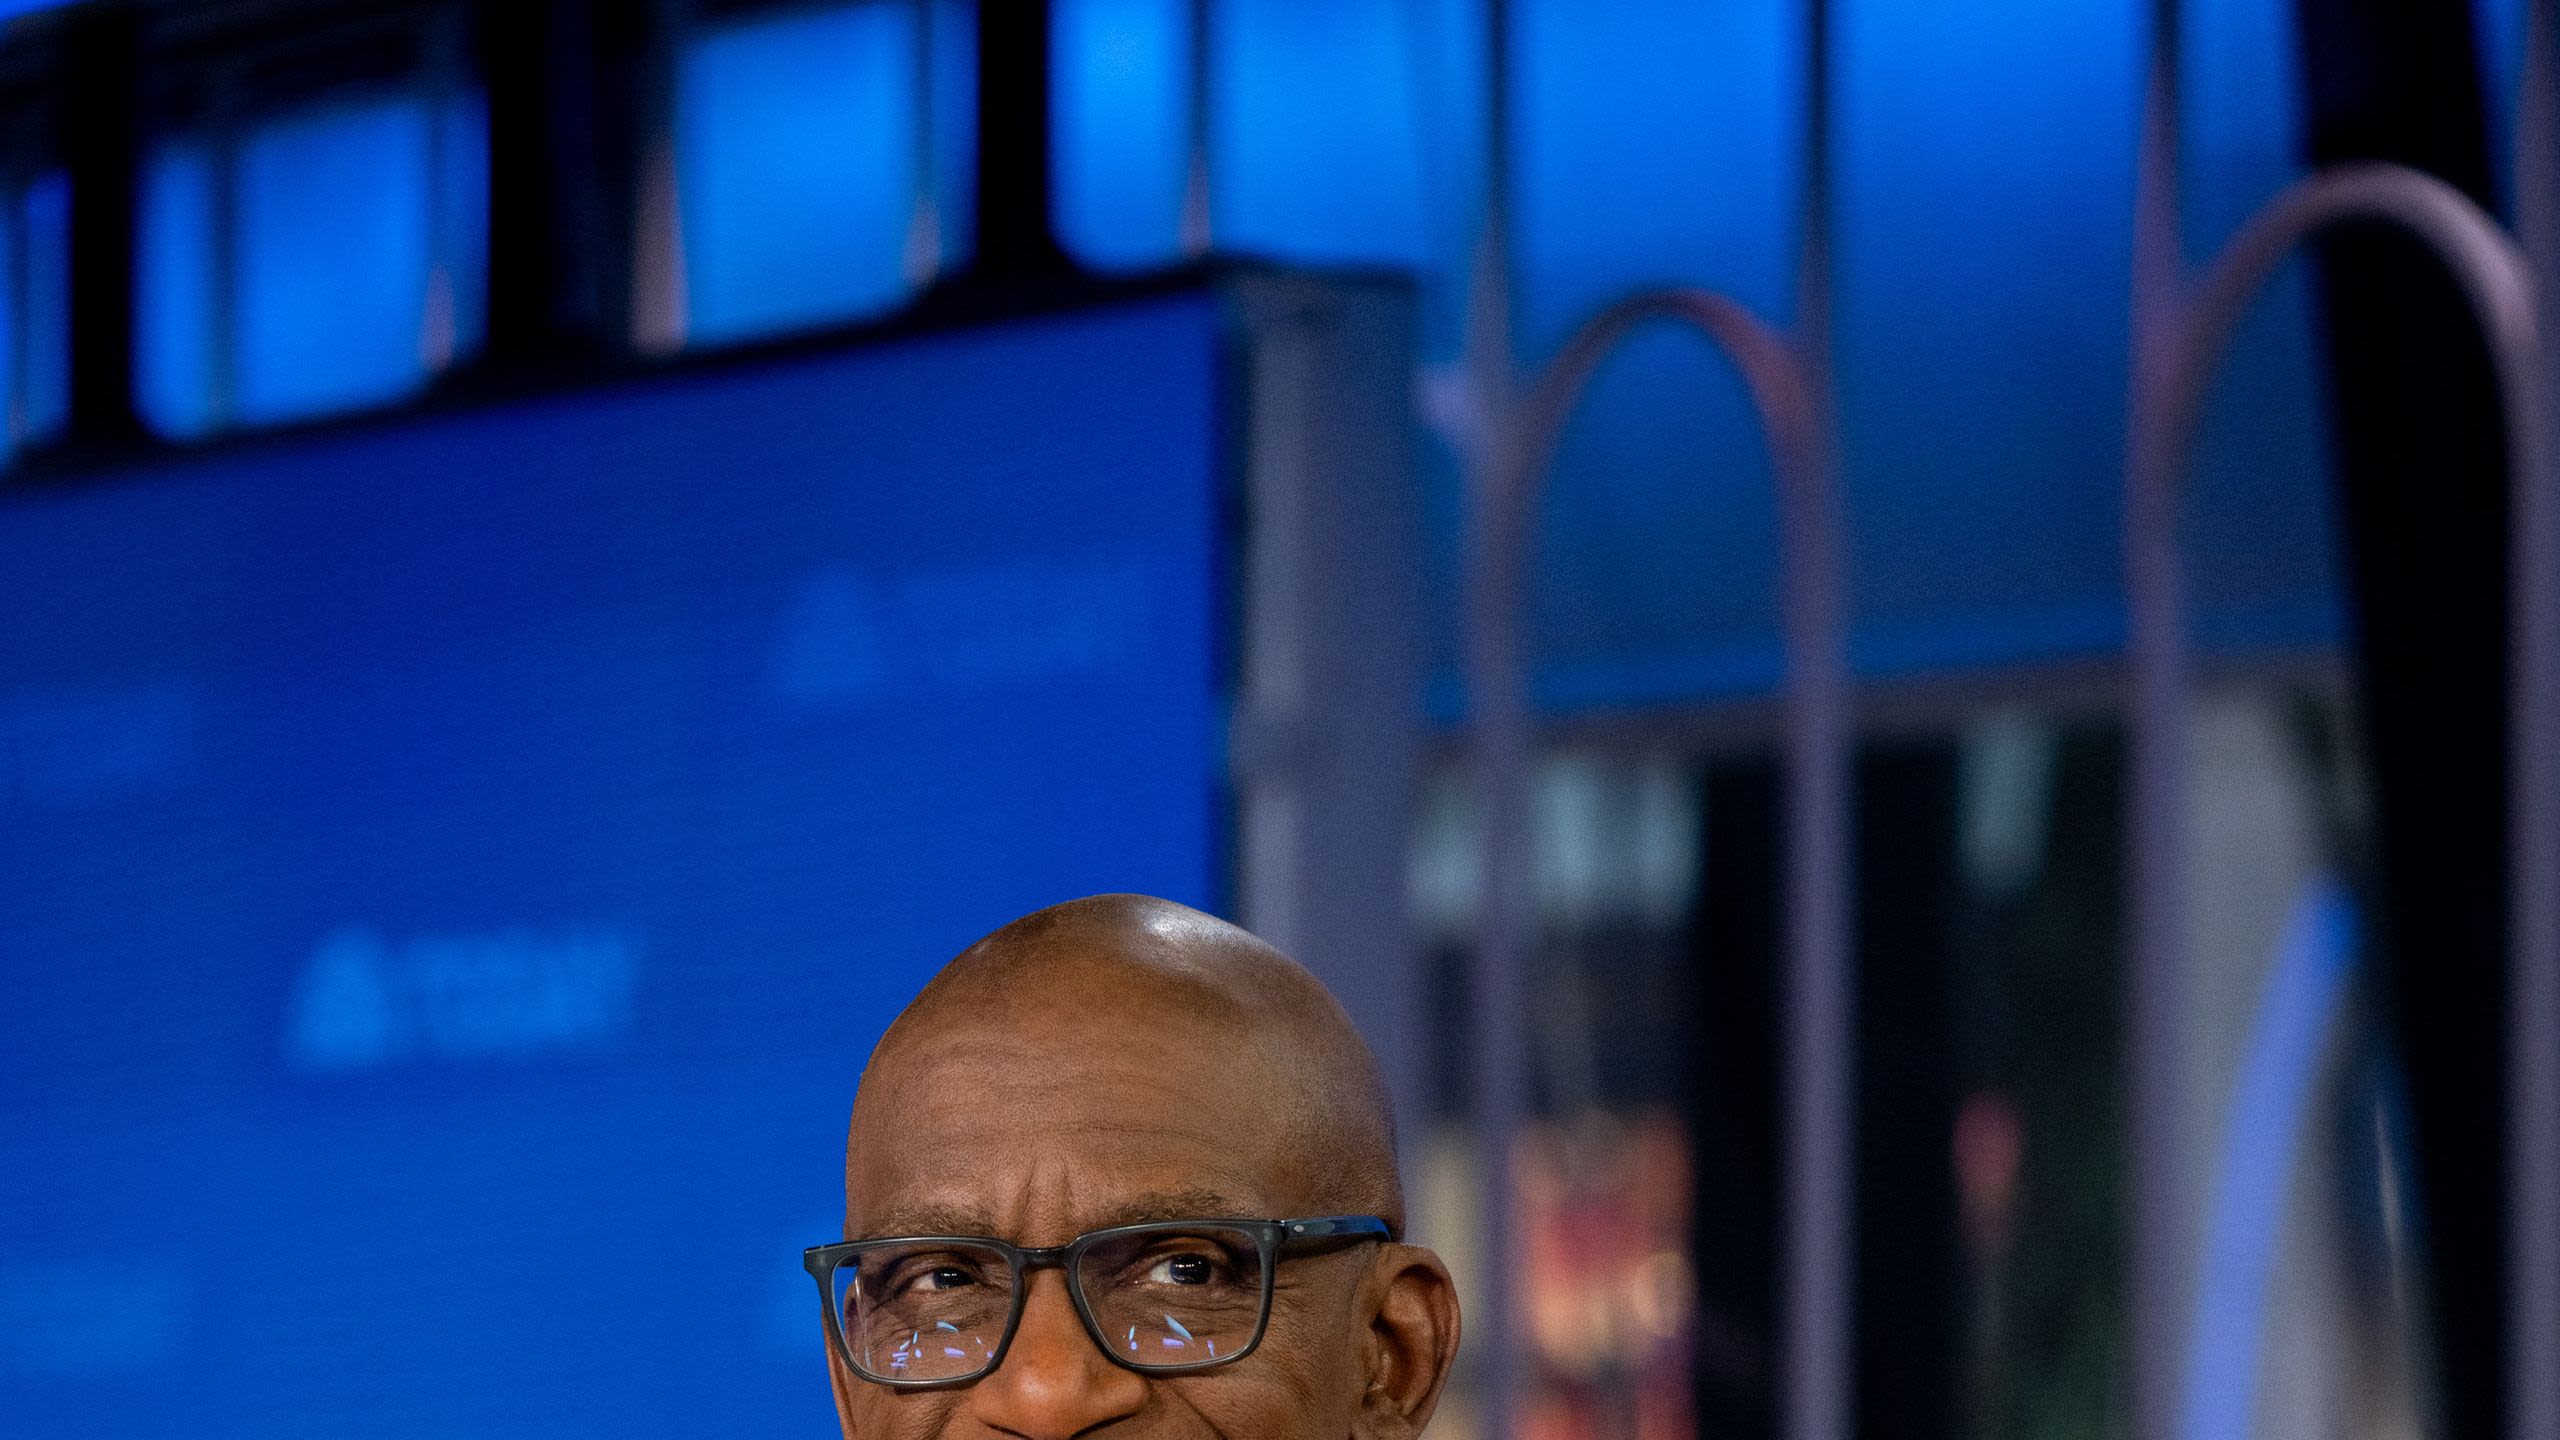 'Today' Star Al Roker on Writing, Getting Active and How He Manages to Do It All